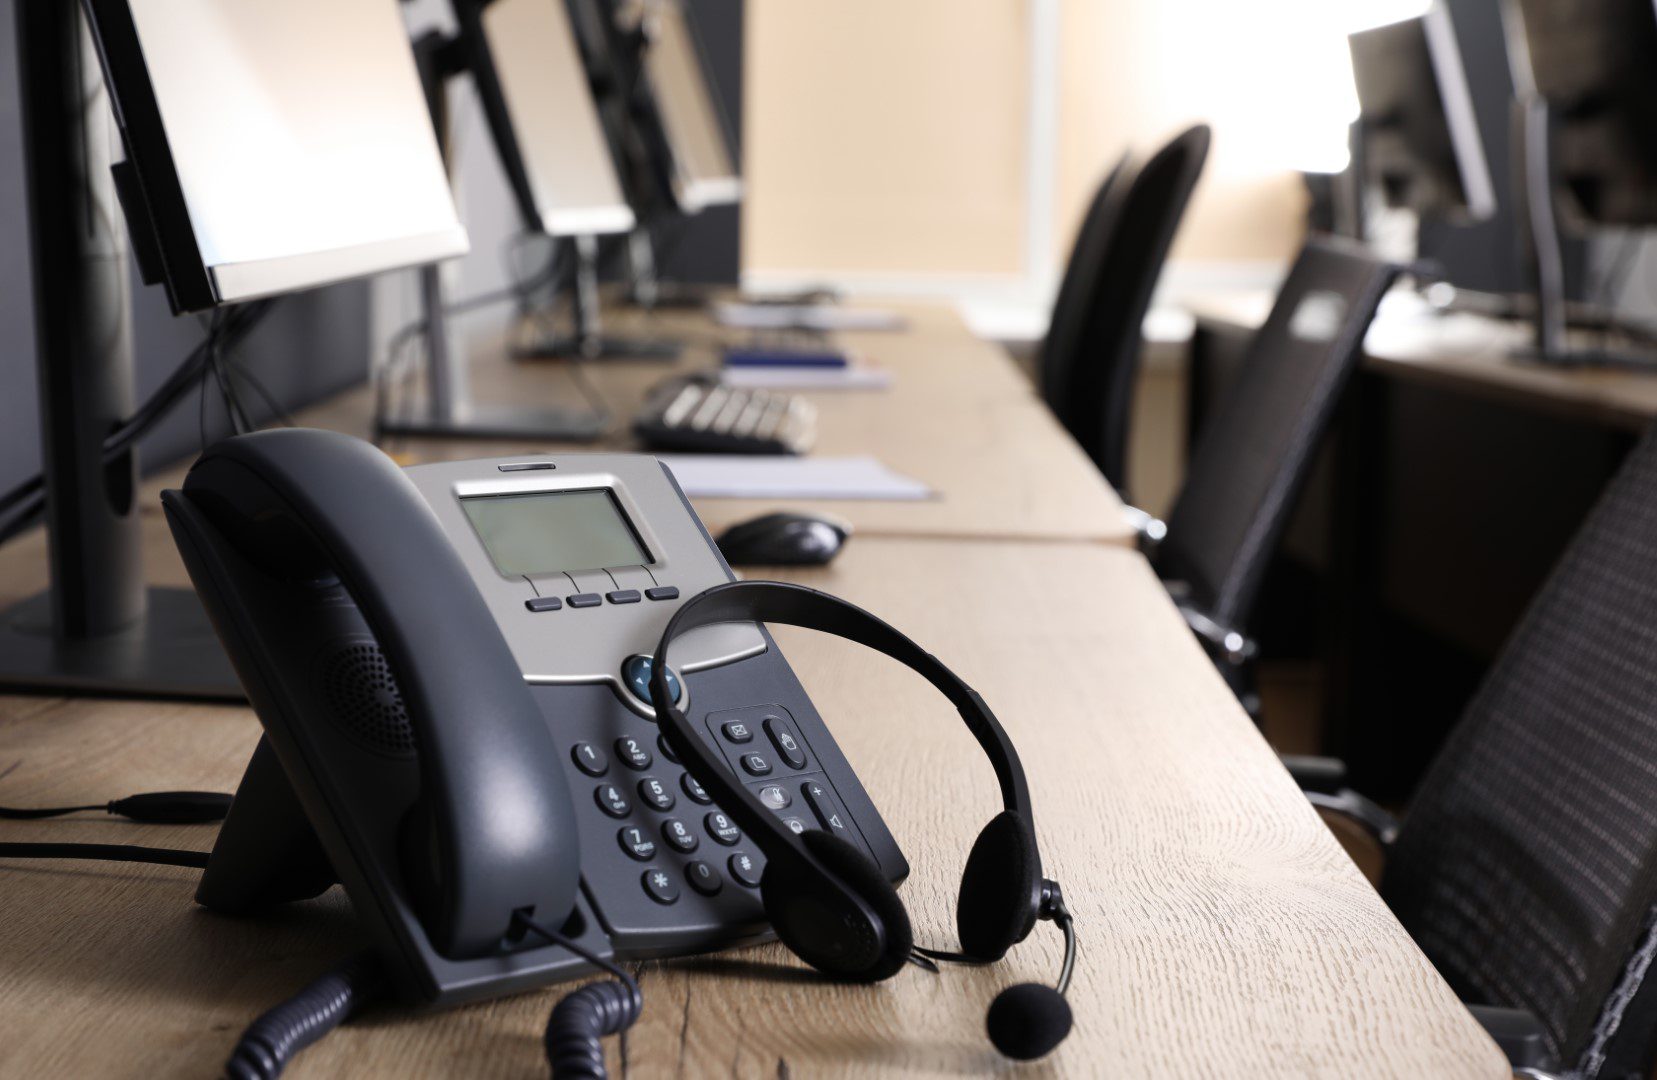 3CX PBX Systems for Offices